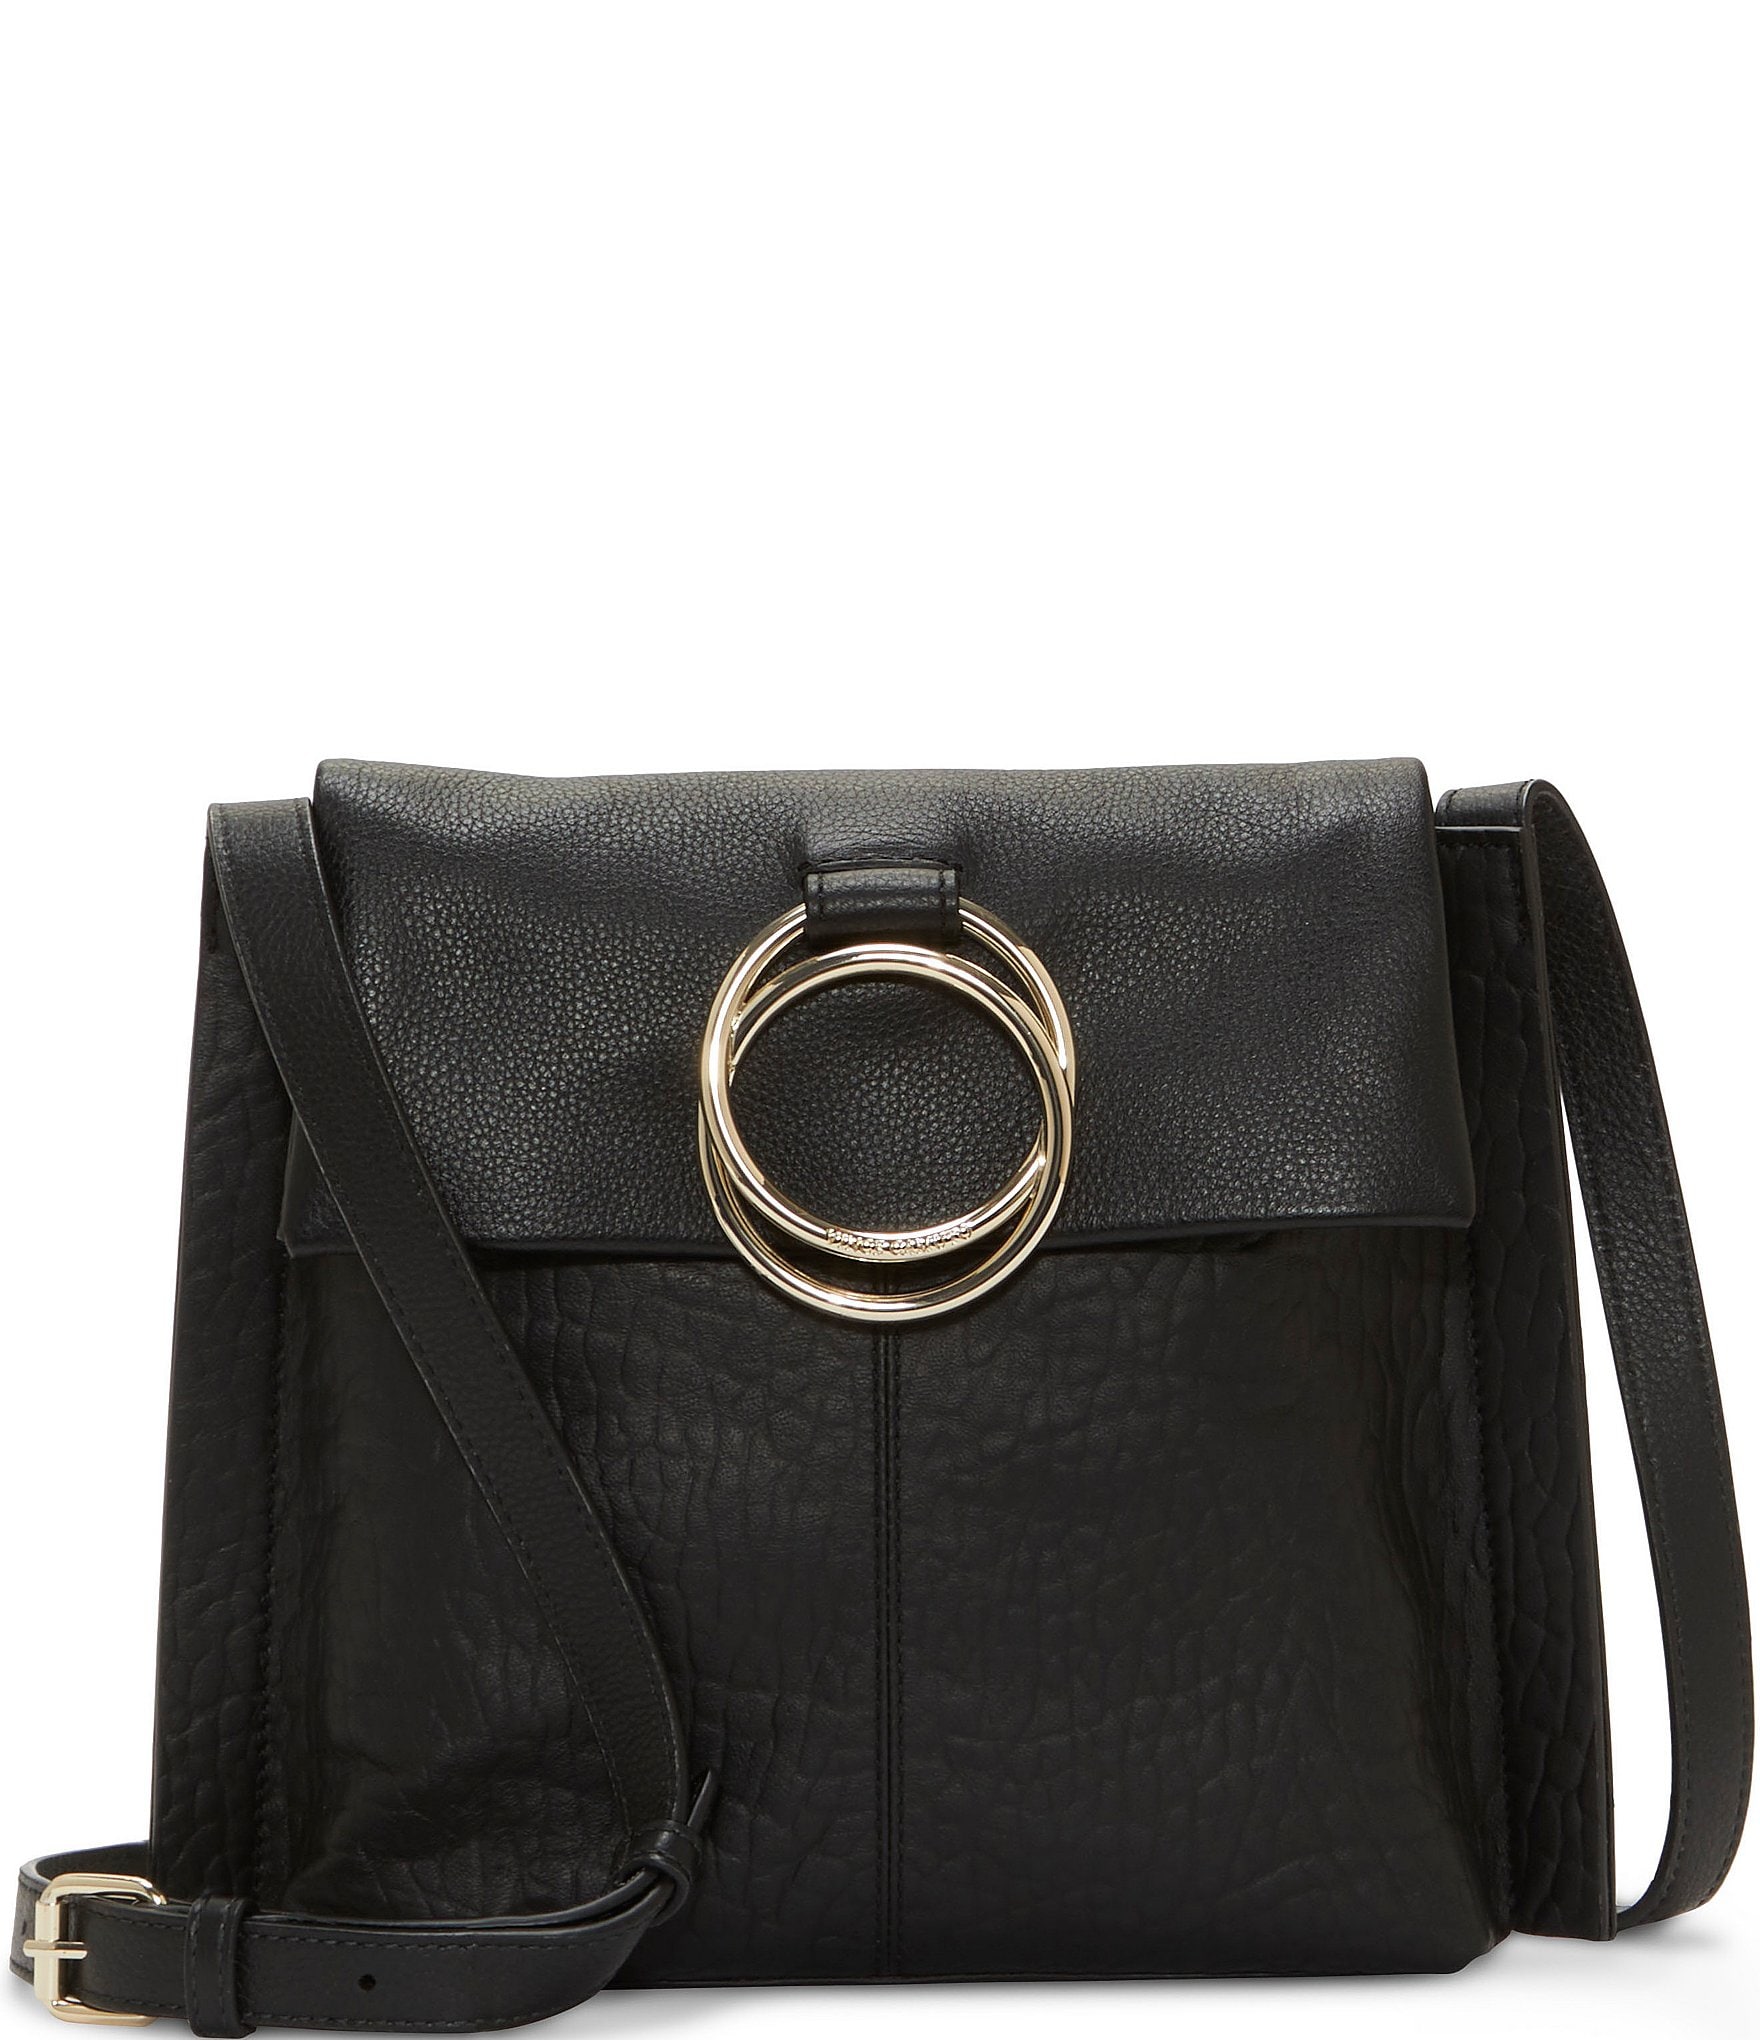 Stylish and Organized Black Tote Bag by Vince Camuto